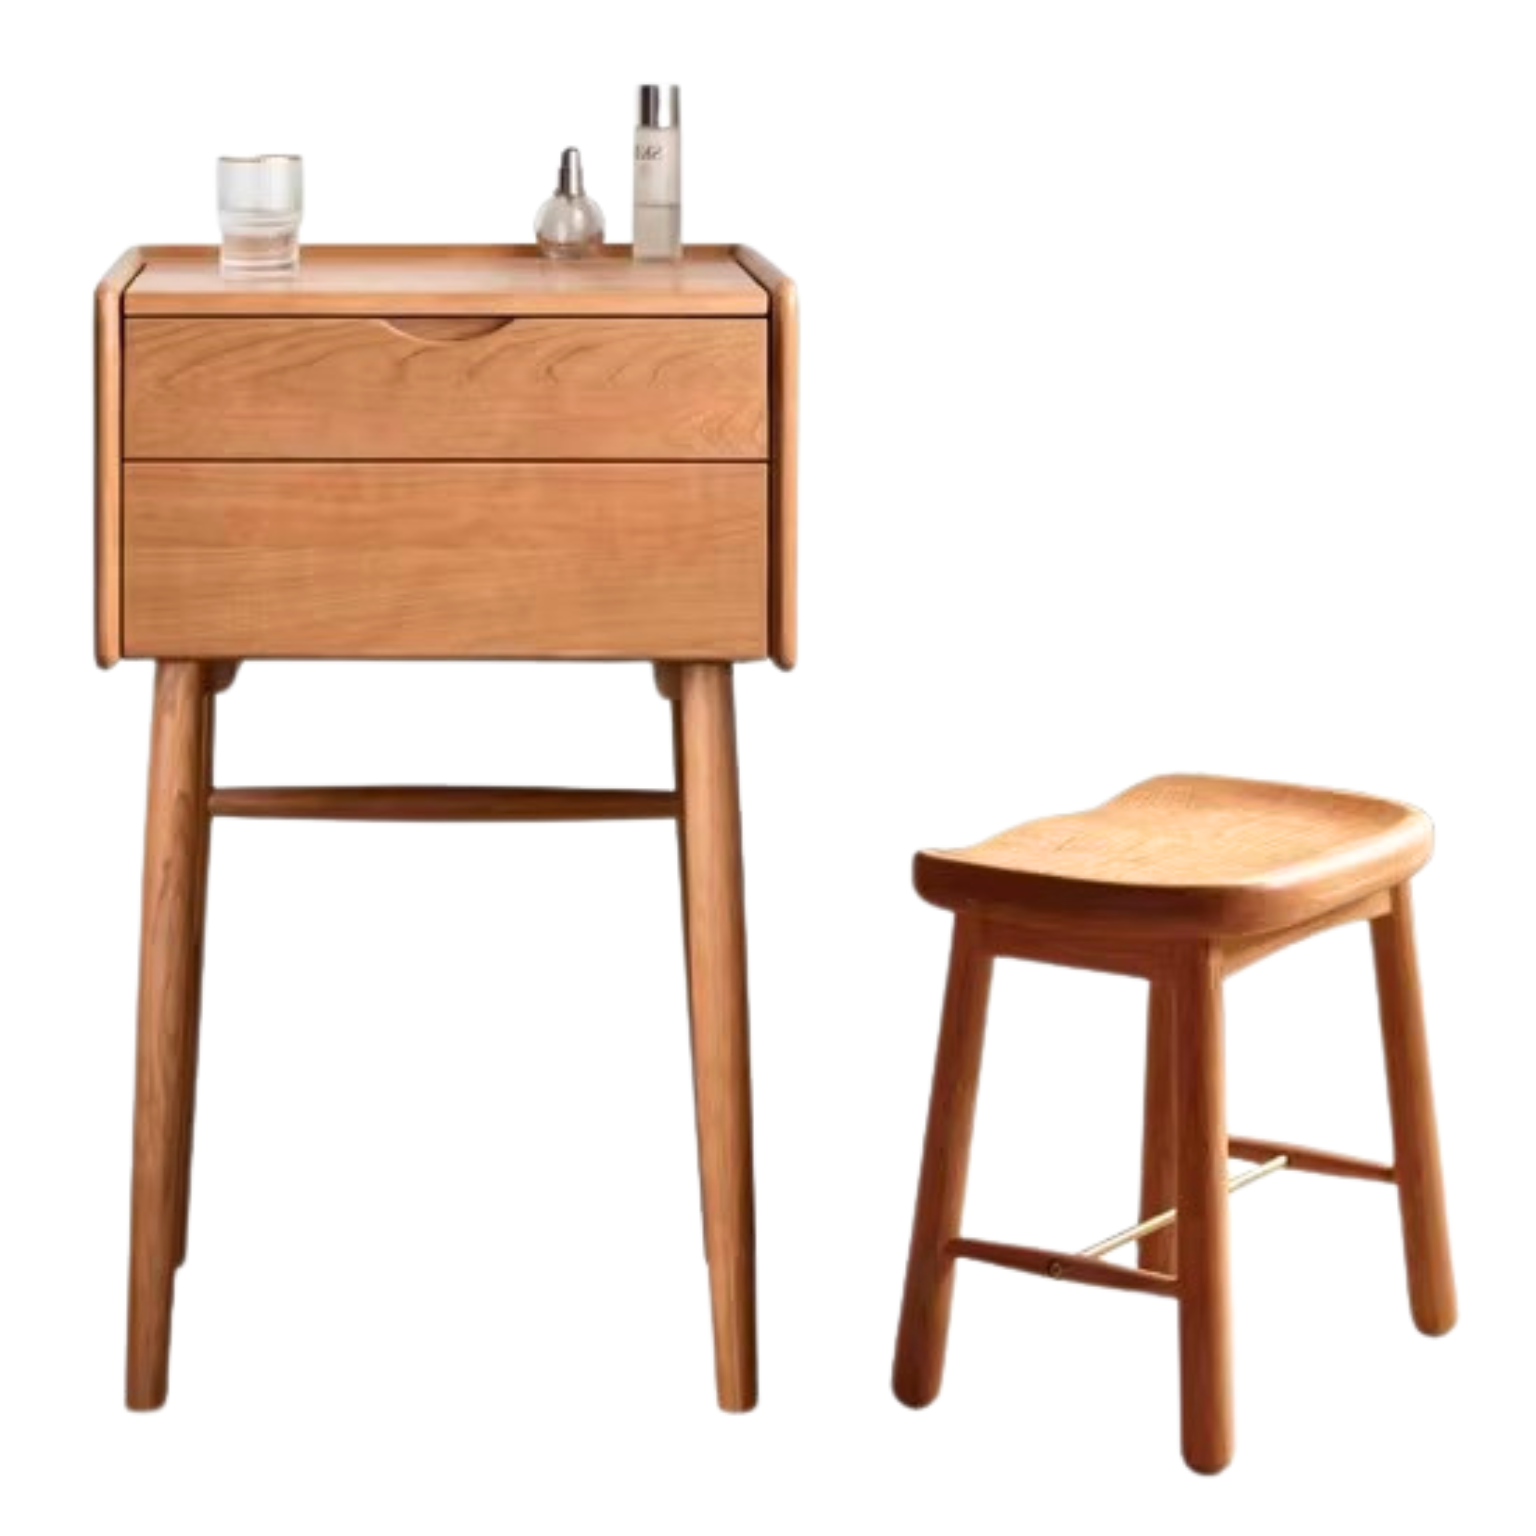 Cherry Wood Small Makeup Table: